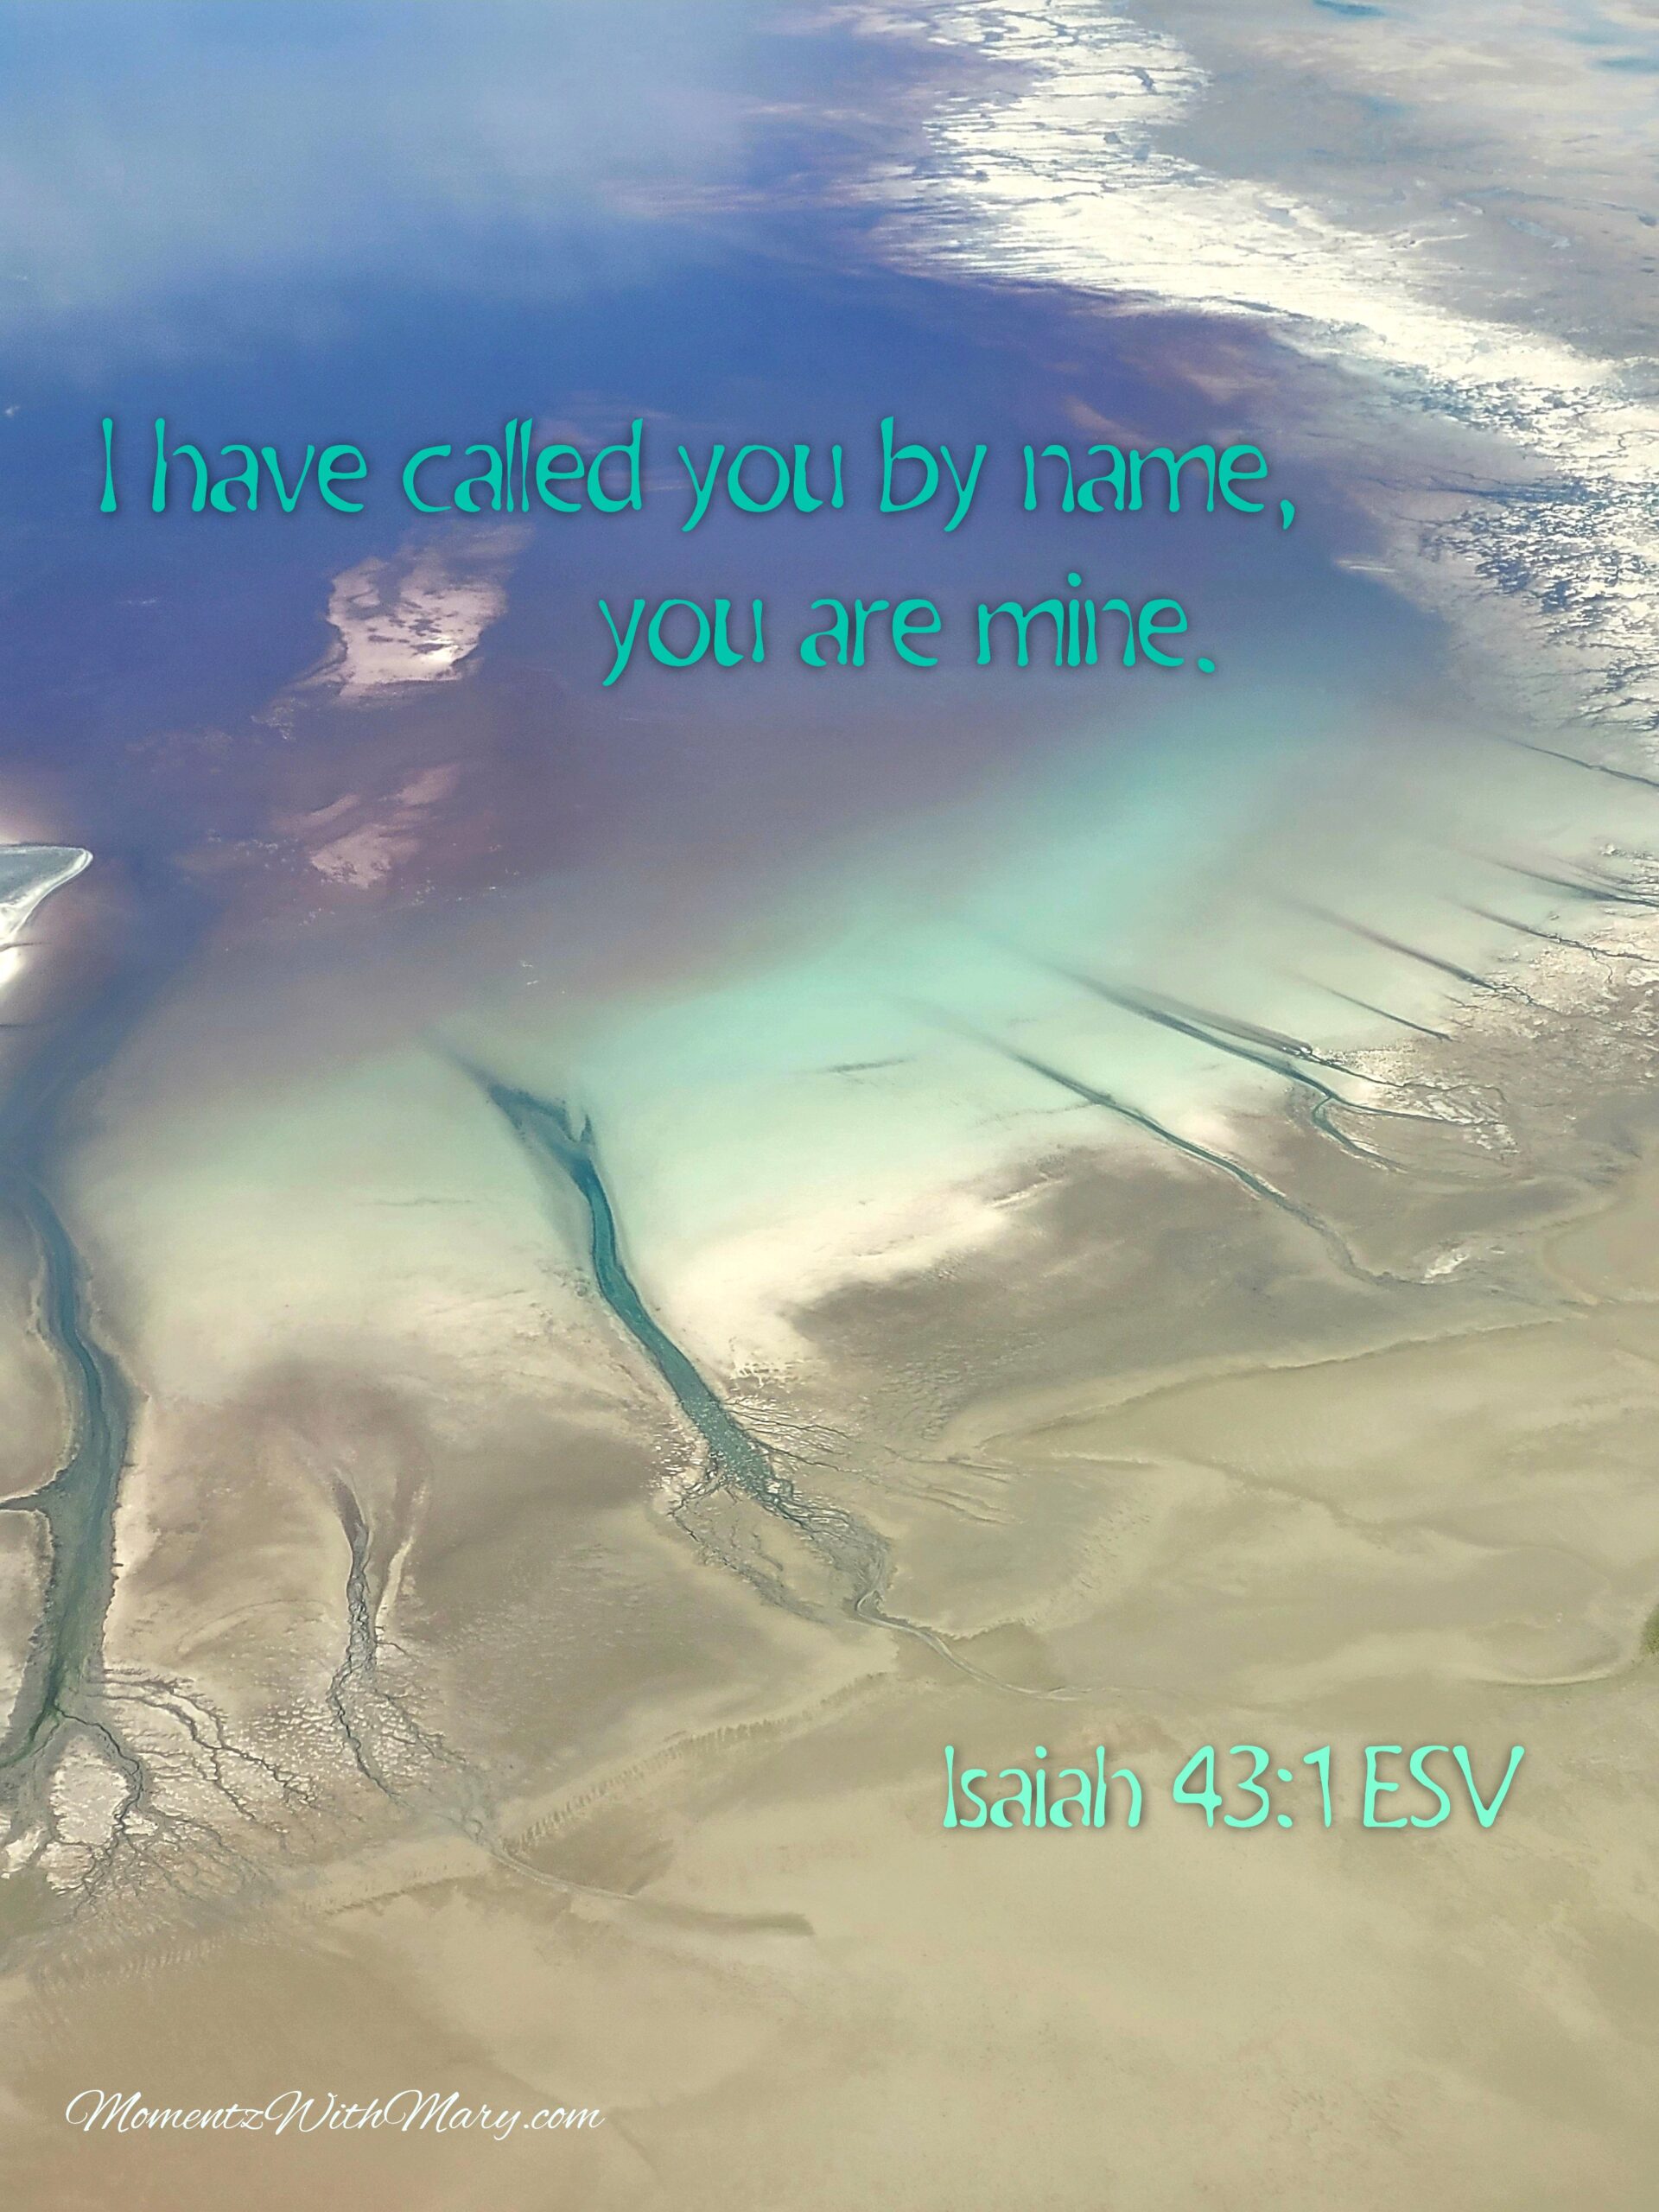 Aerial image of the Great Salt Lake with blues, reds, and browns of the terrain. Isaiah 43:1 ESV I have called you by name, you are mine.